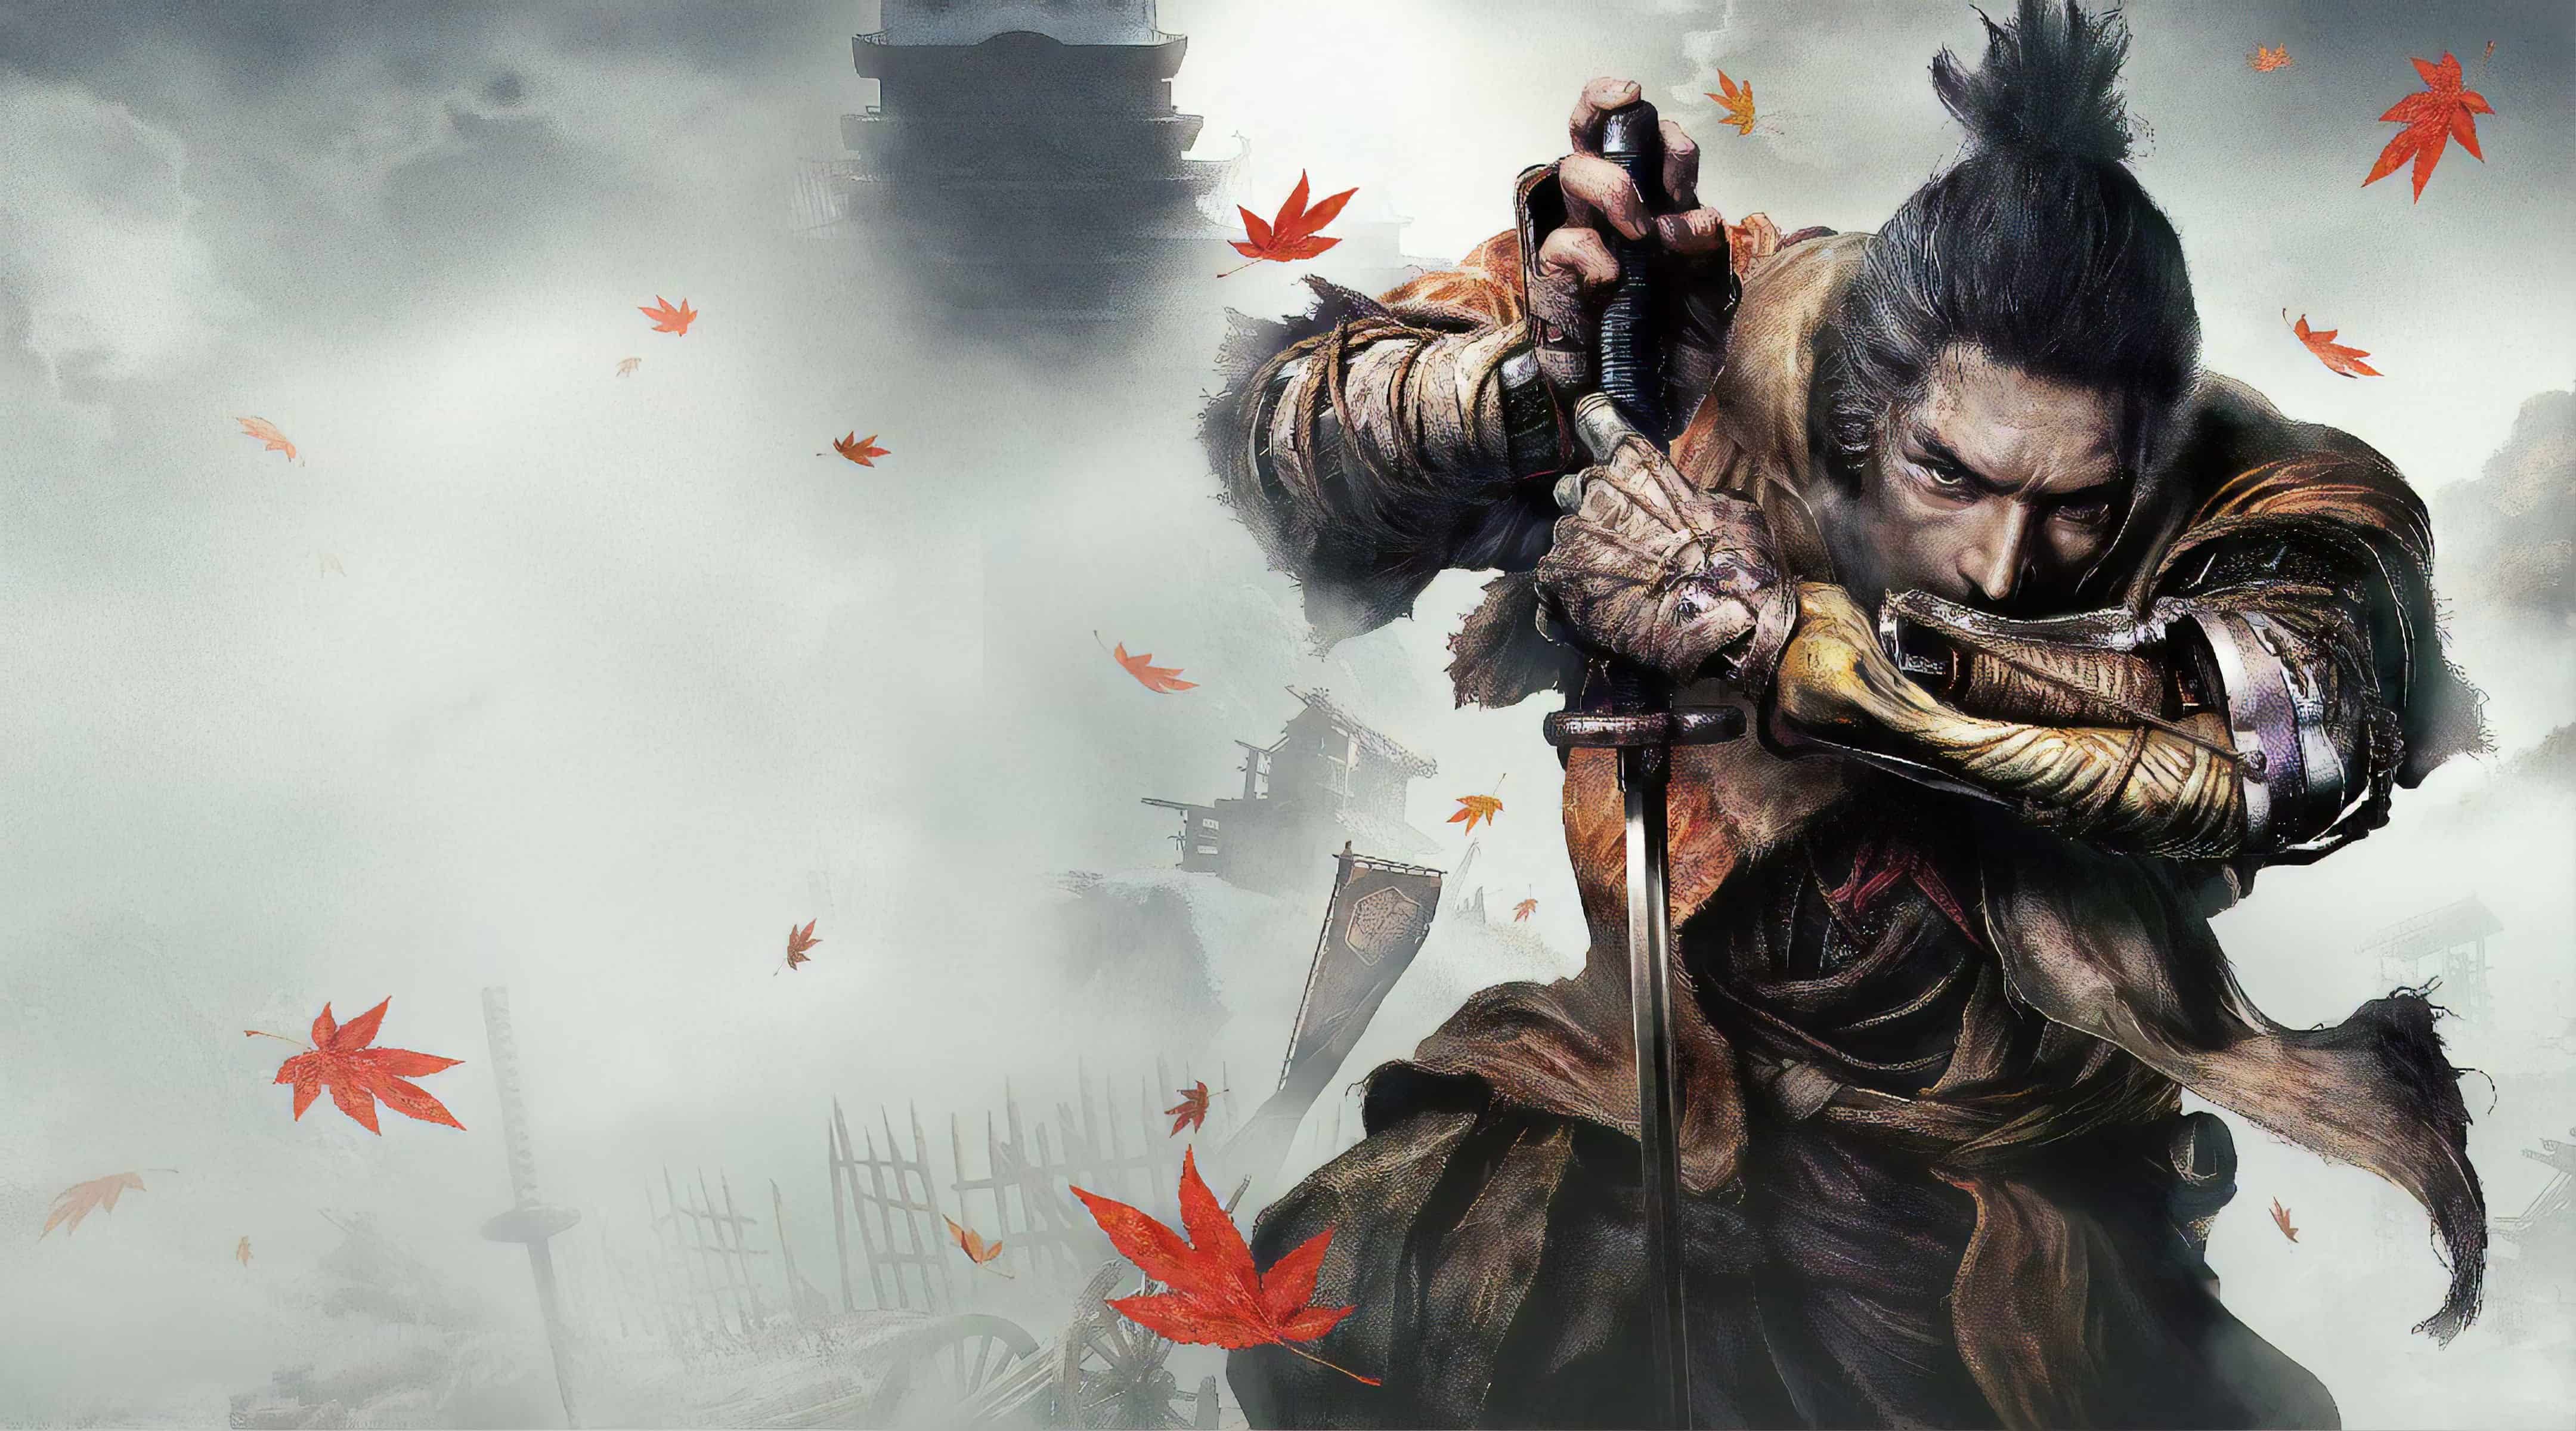 Sekiro: Shadows Die Twice - It Changed My Perspective on Soulsborne Games [Sekiro Tips For Beginners]